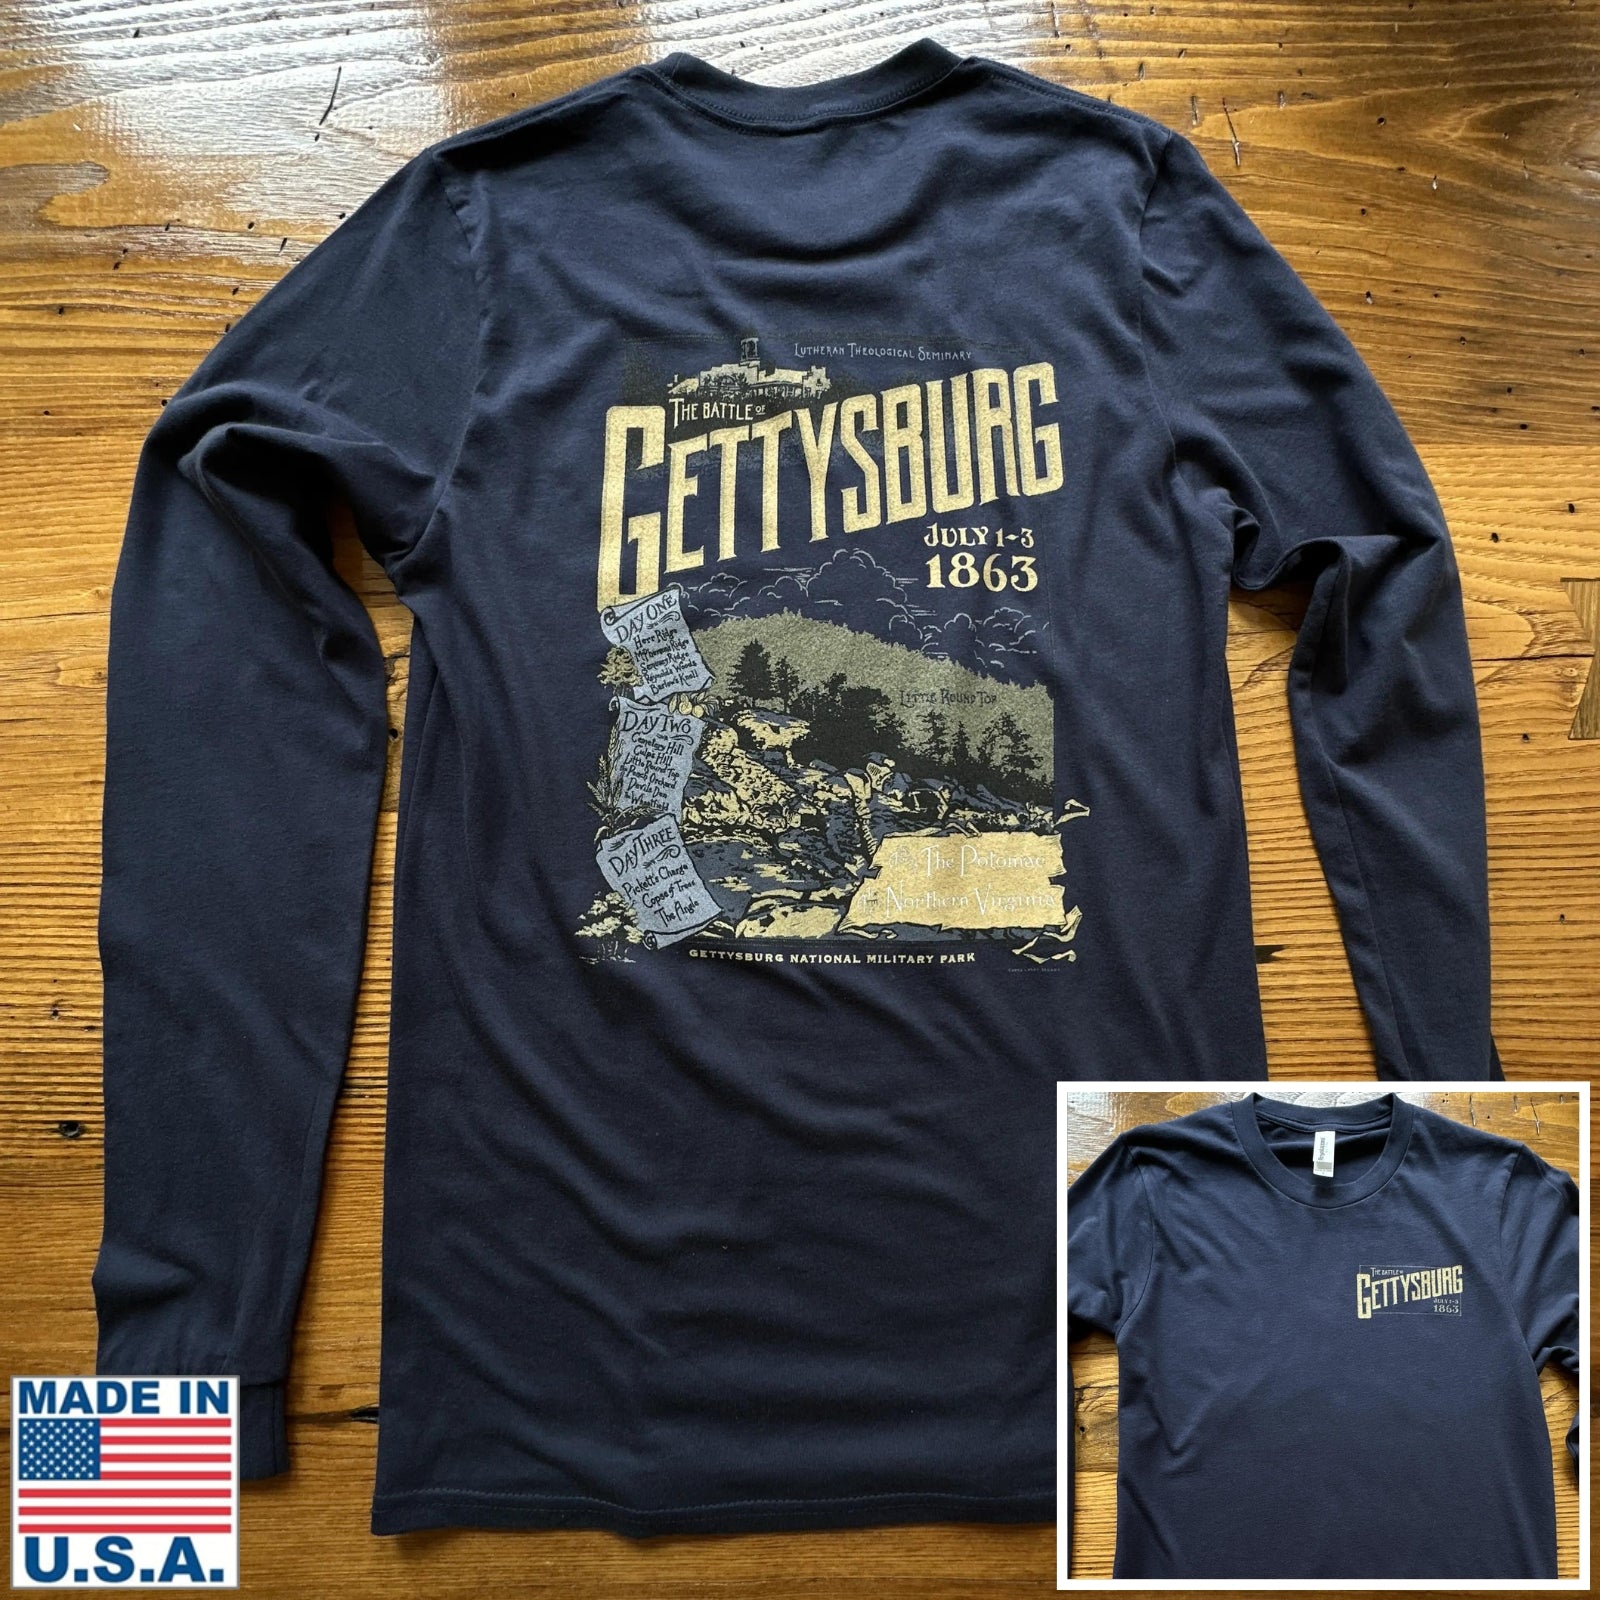 "The Battle of Gettysburg" Long-sleeved shirt from The History List store